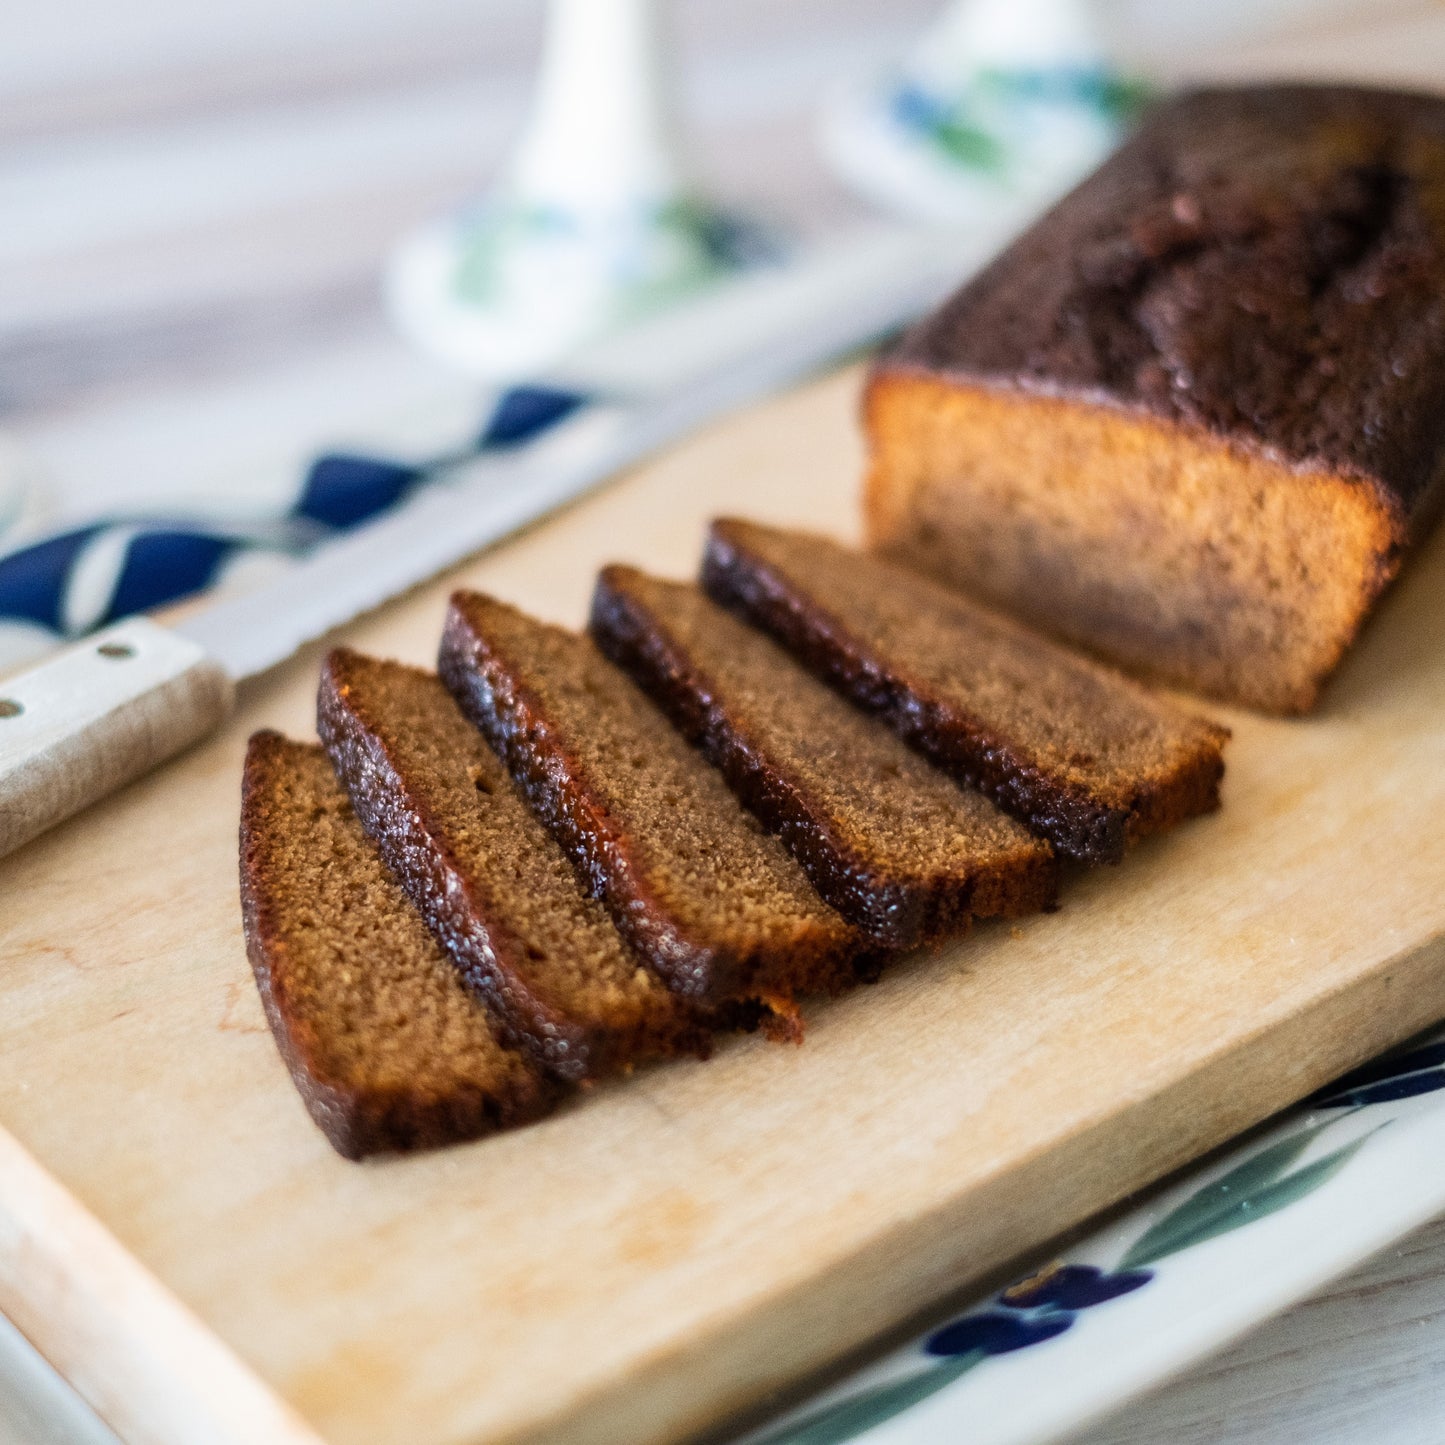 Our delicious honey cake is a favorite on the High Holy Days.  It is moist and has a delicious blend of spices like cinnamon, nutmeg and allspice. 